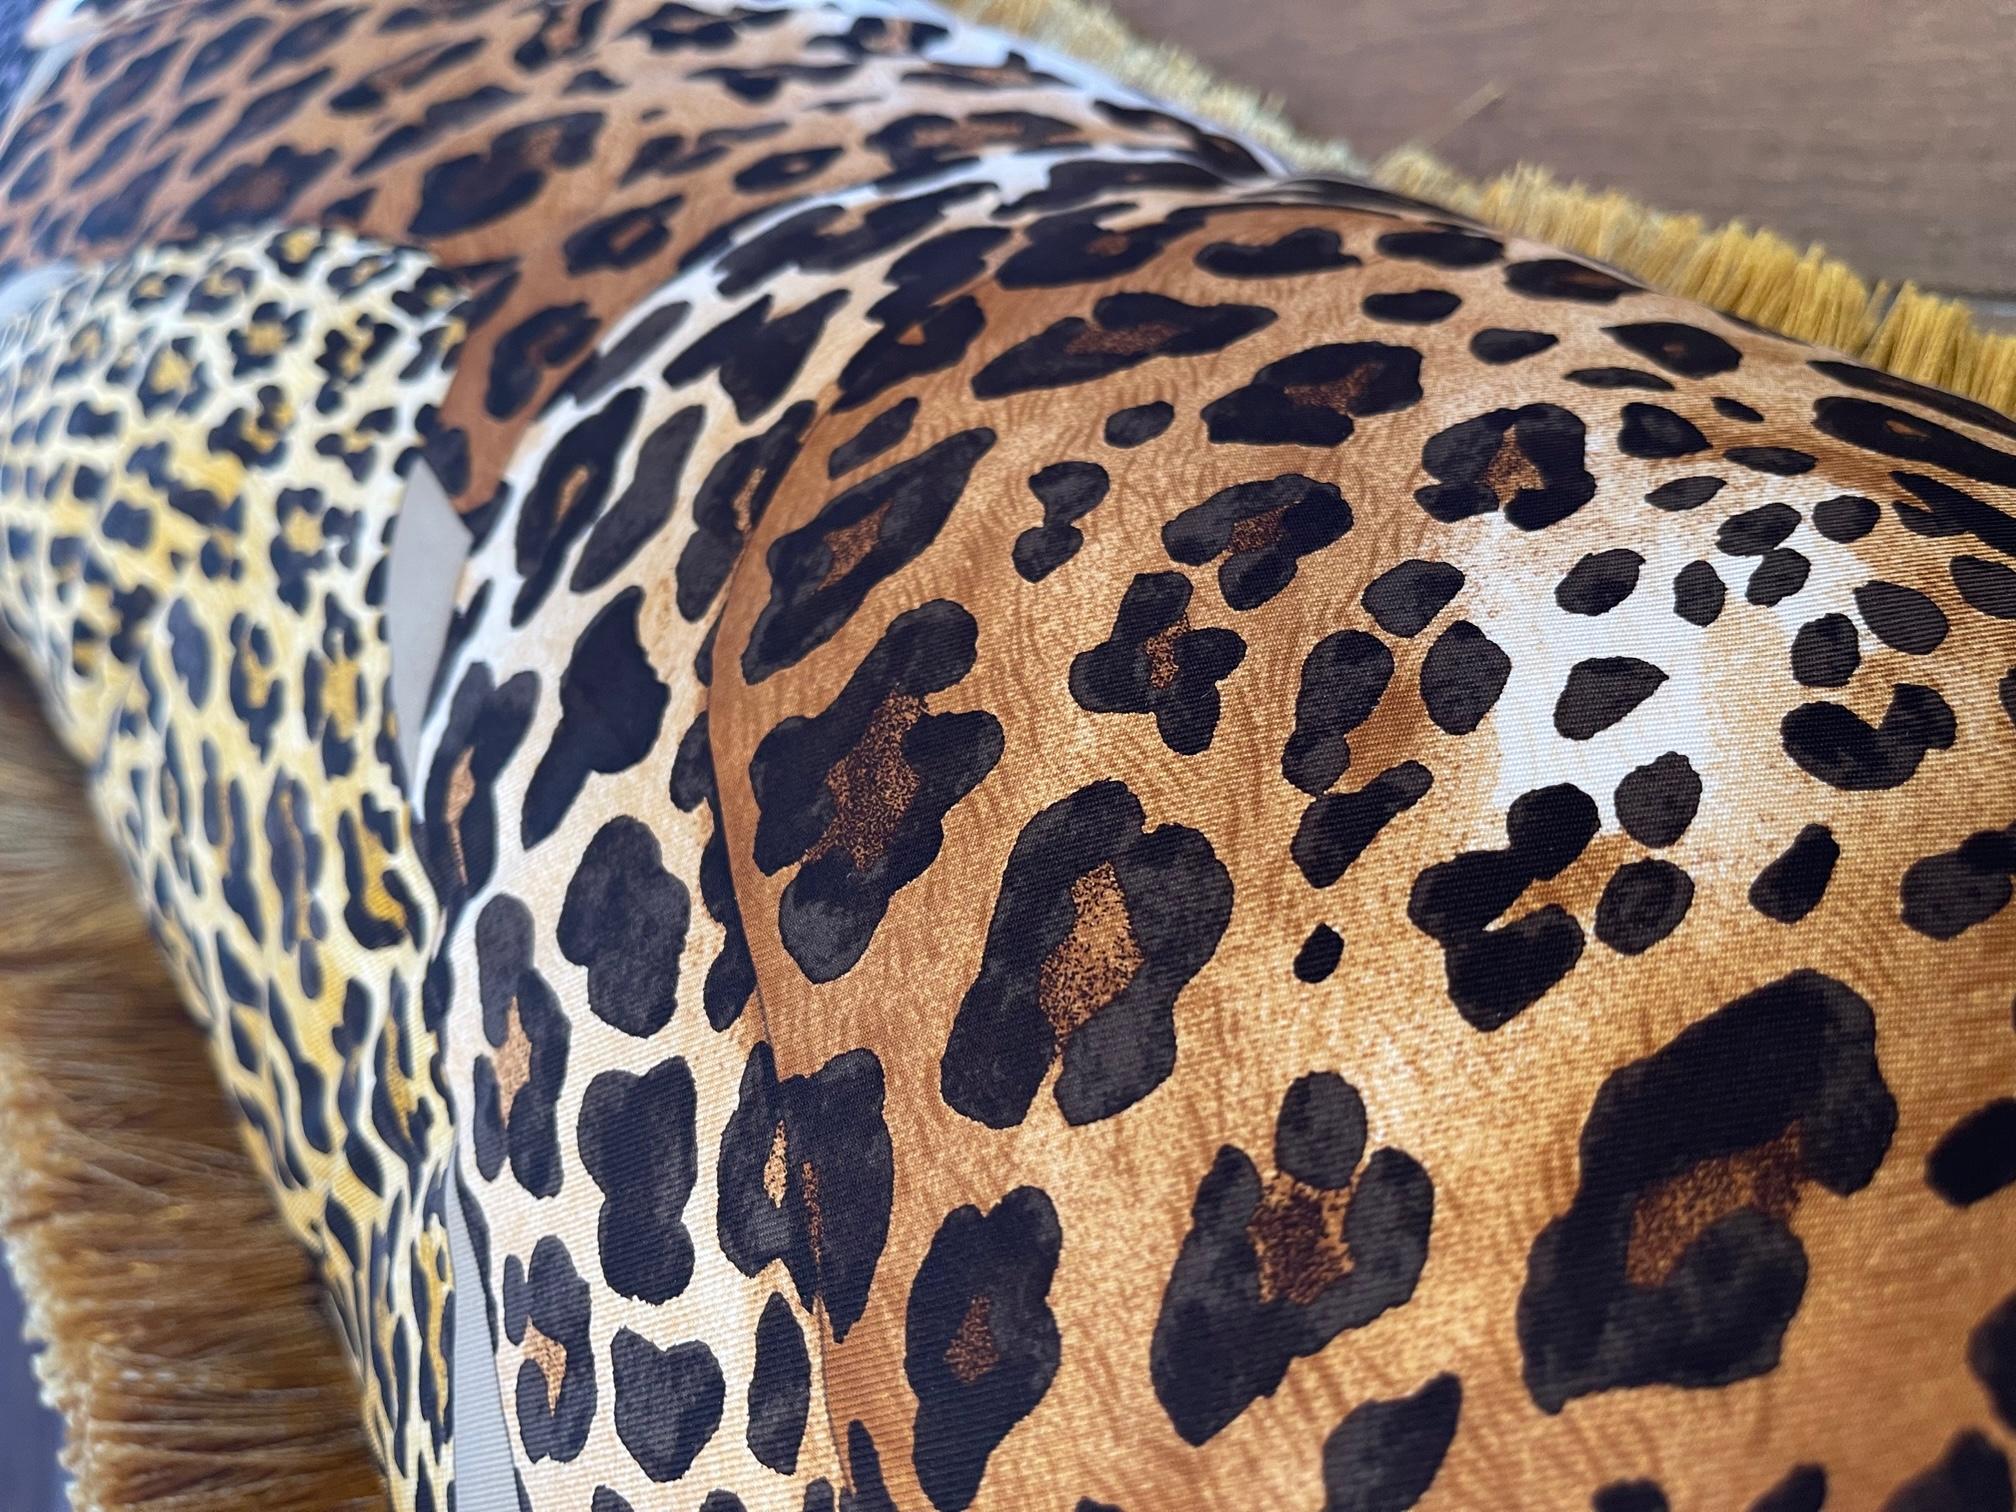 This original pillow design by Gomez is a treasure to have. The luxury silk scarf is one of the more recent makes from luxury fashion goods house of Hermes. This lazy leopardess silk garment is combined with a plush black velvet and finished in a